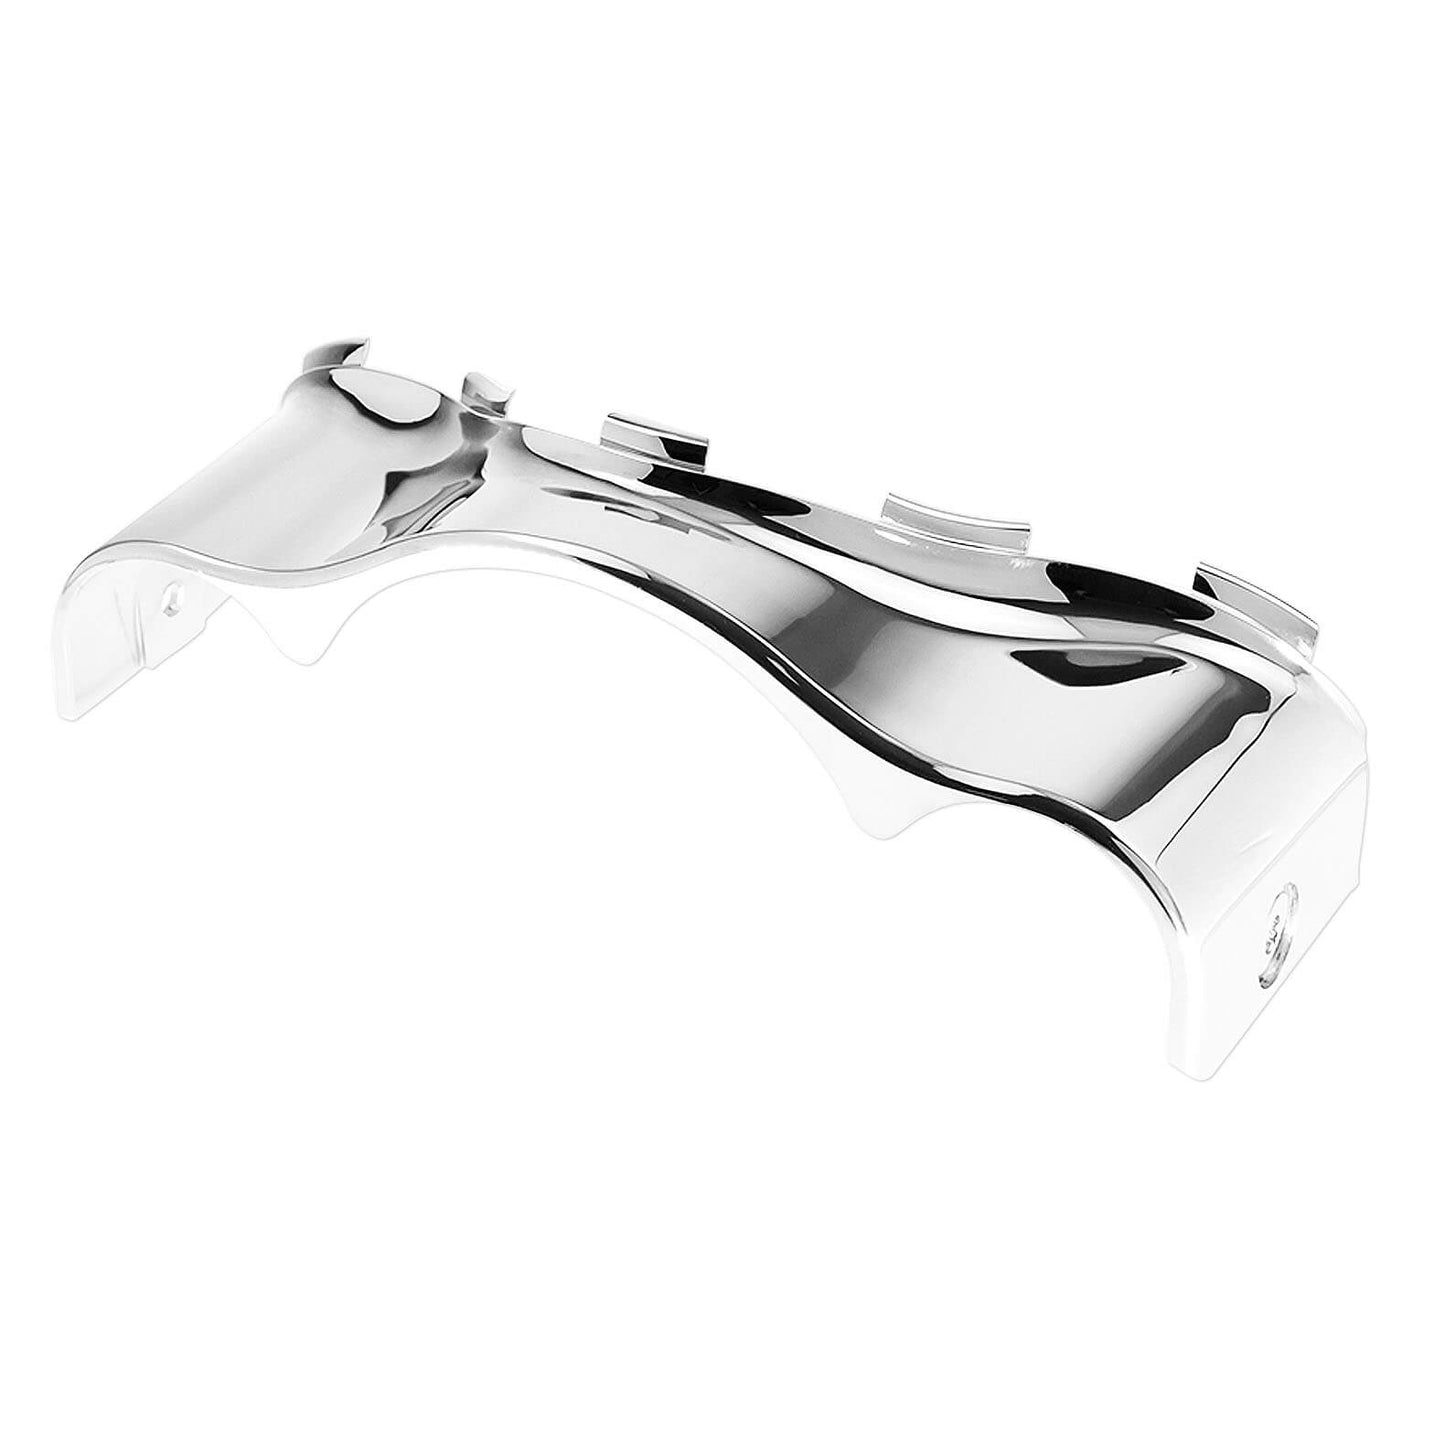 Batwing ABS Lower Trim Skirt Fairing for Harley Touring 14-16 | Mactions